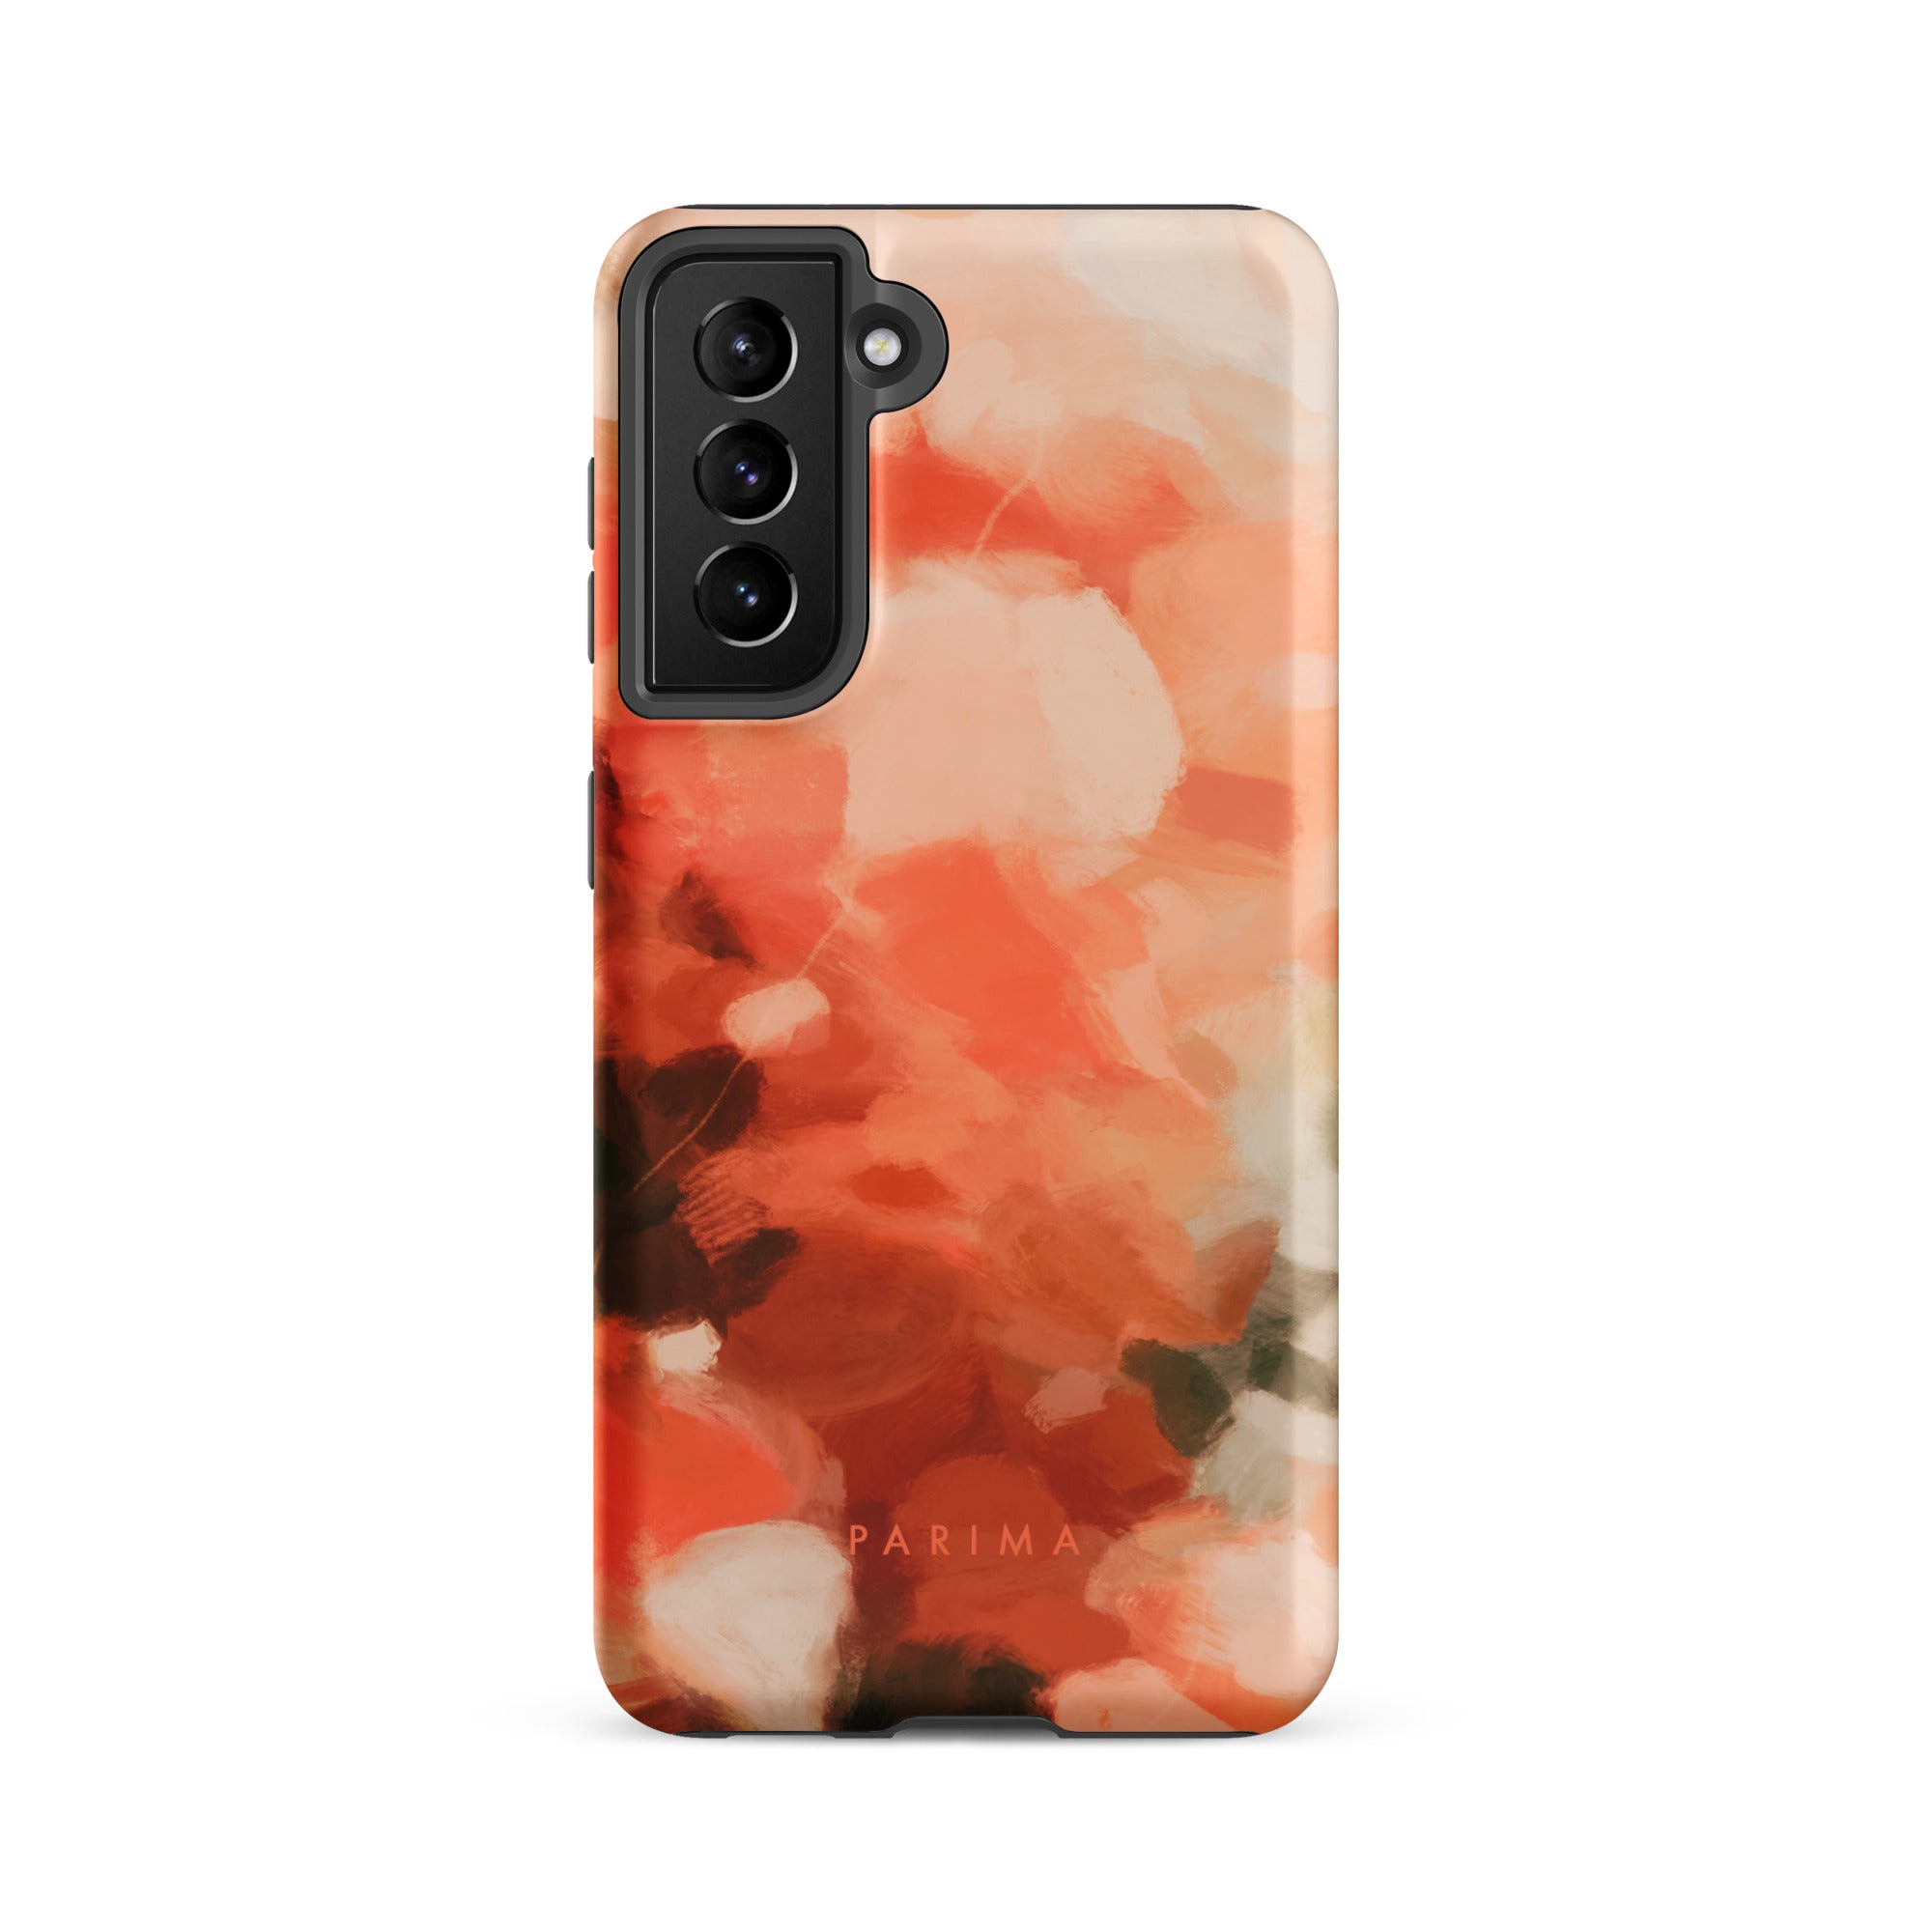 Sweet Nectar, orange and pink abstract art on Samsung Galaxy S21 FE tough case by Parima Studio